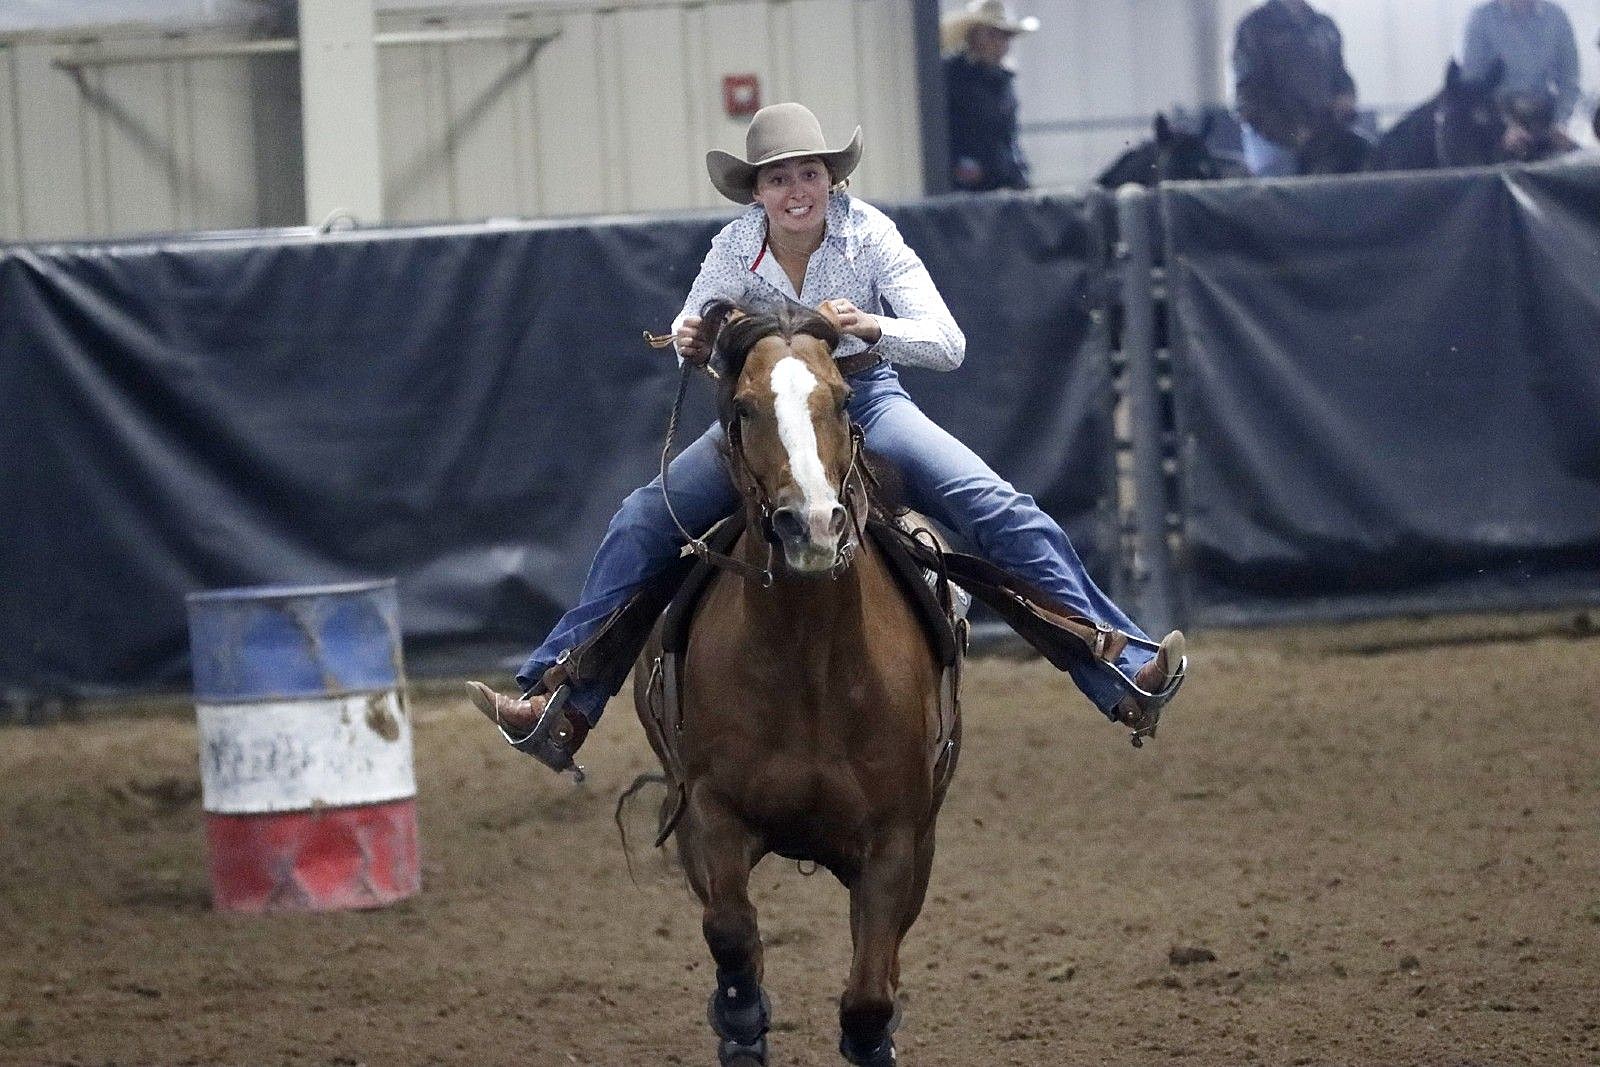 Tuf Cooper Wins CFD Rodeo Title 20 Years After Dad